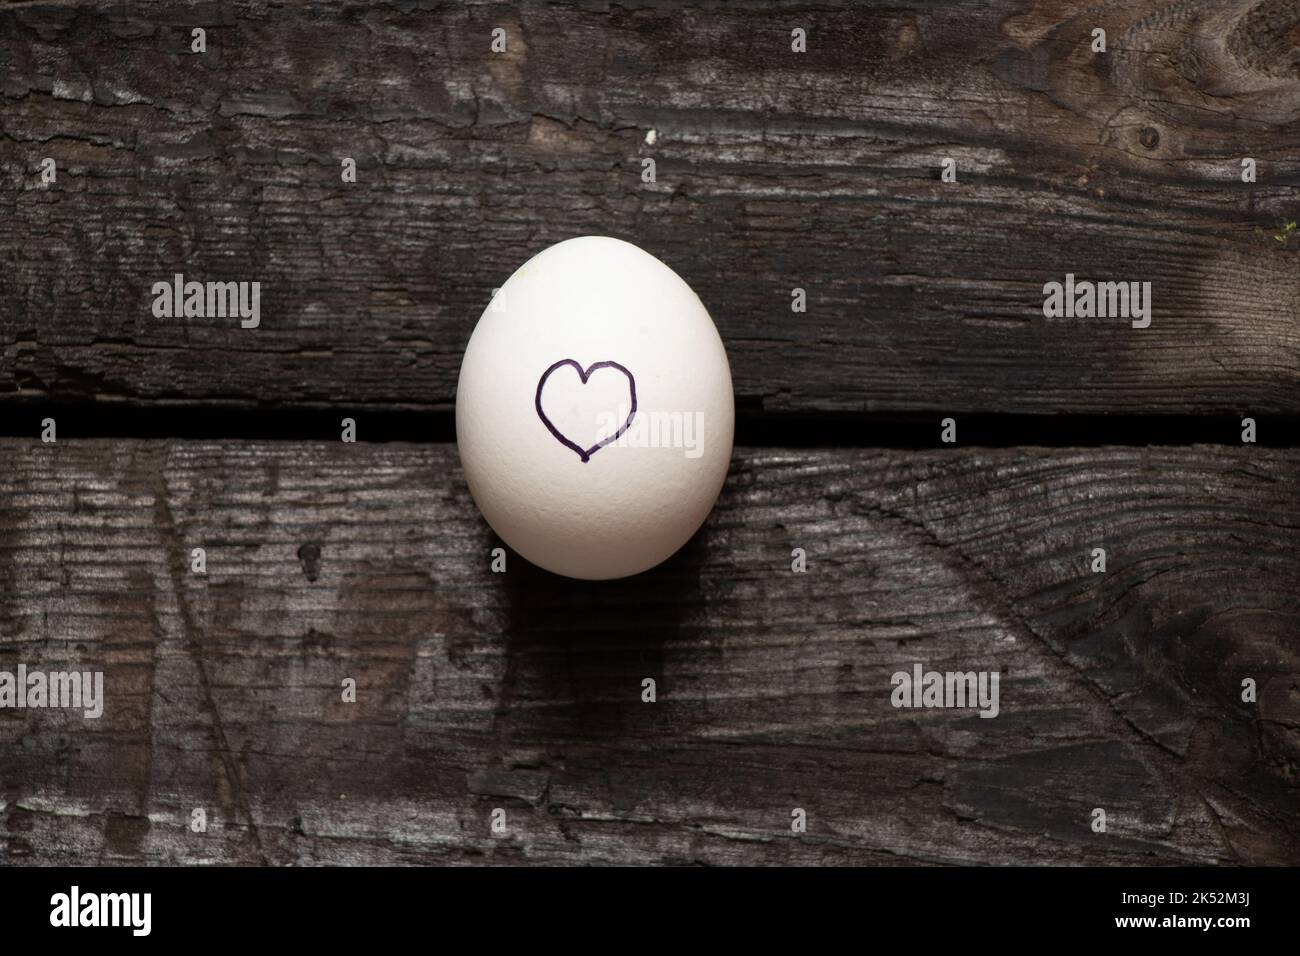 heart is drawn on a chicken egg that lies on an old wooden table, love and feelings Stock Photo